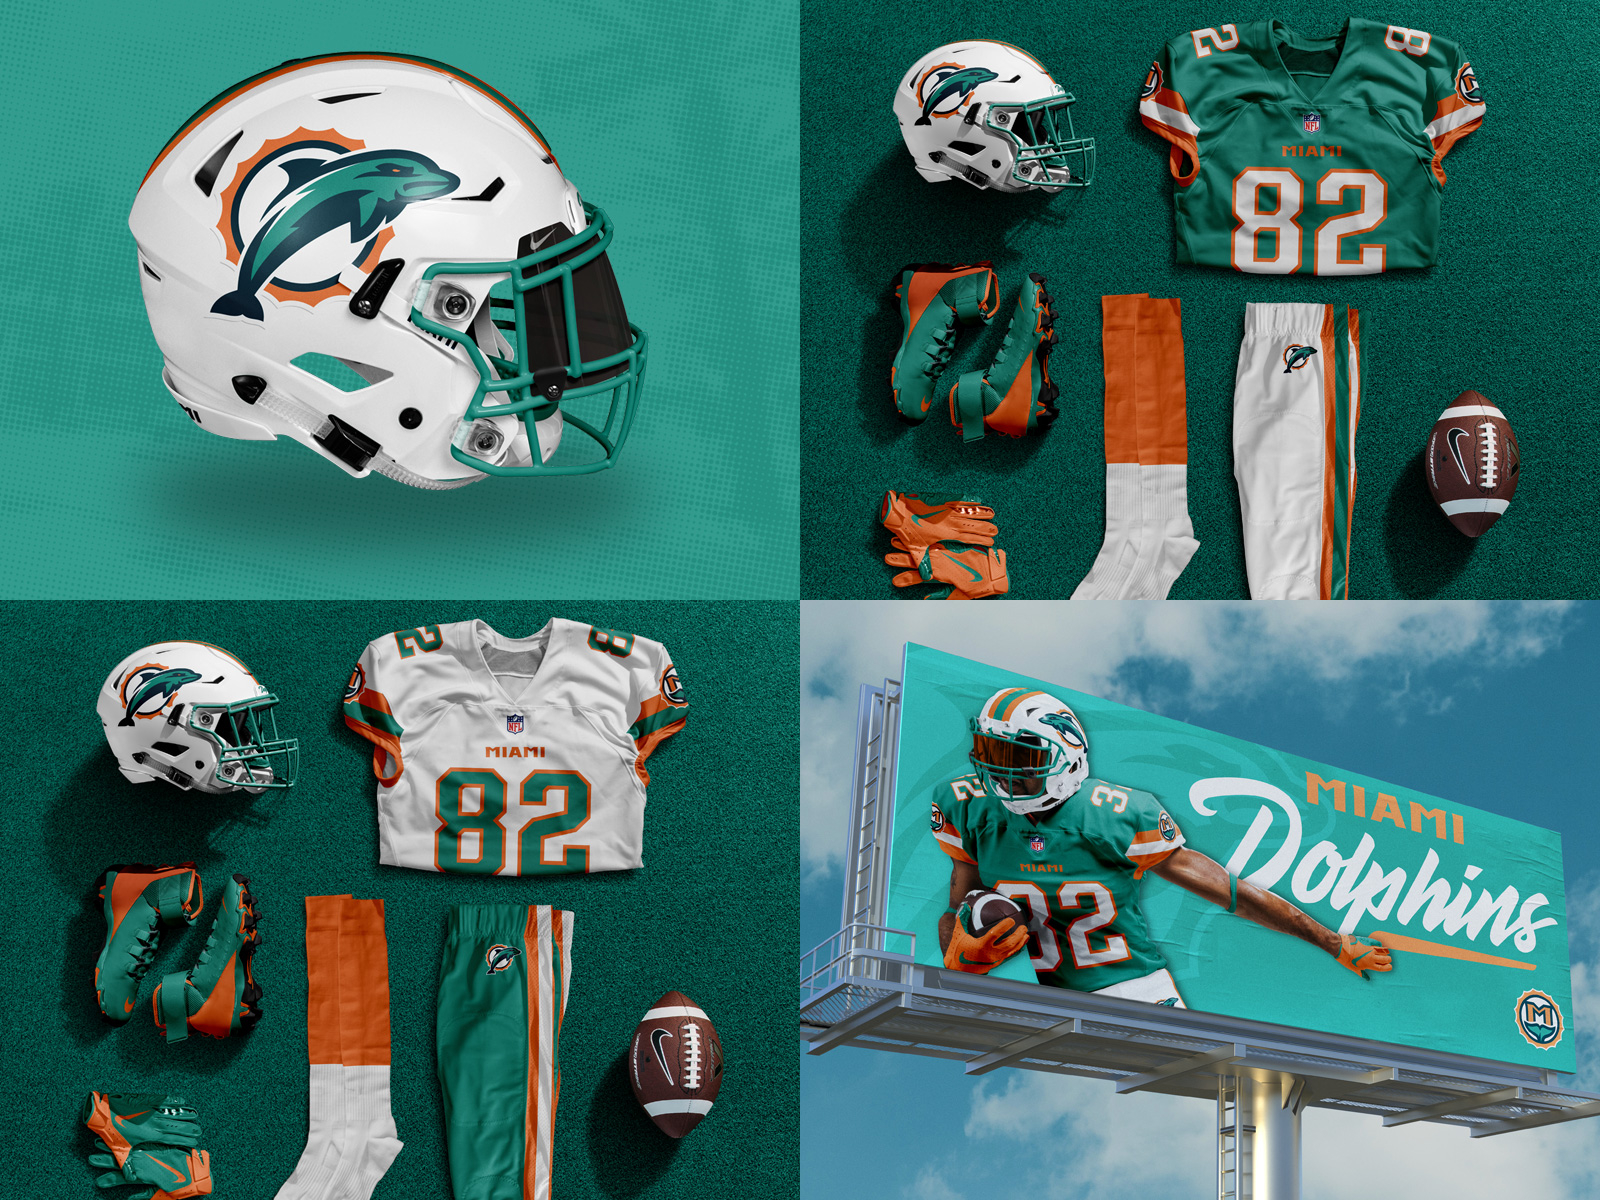 Miami Dolphins Uniform Concept by Dan Blessing on Dribbble